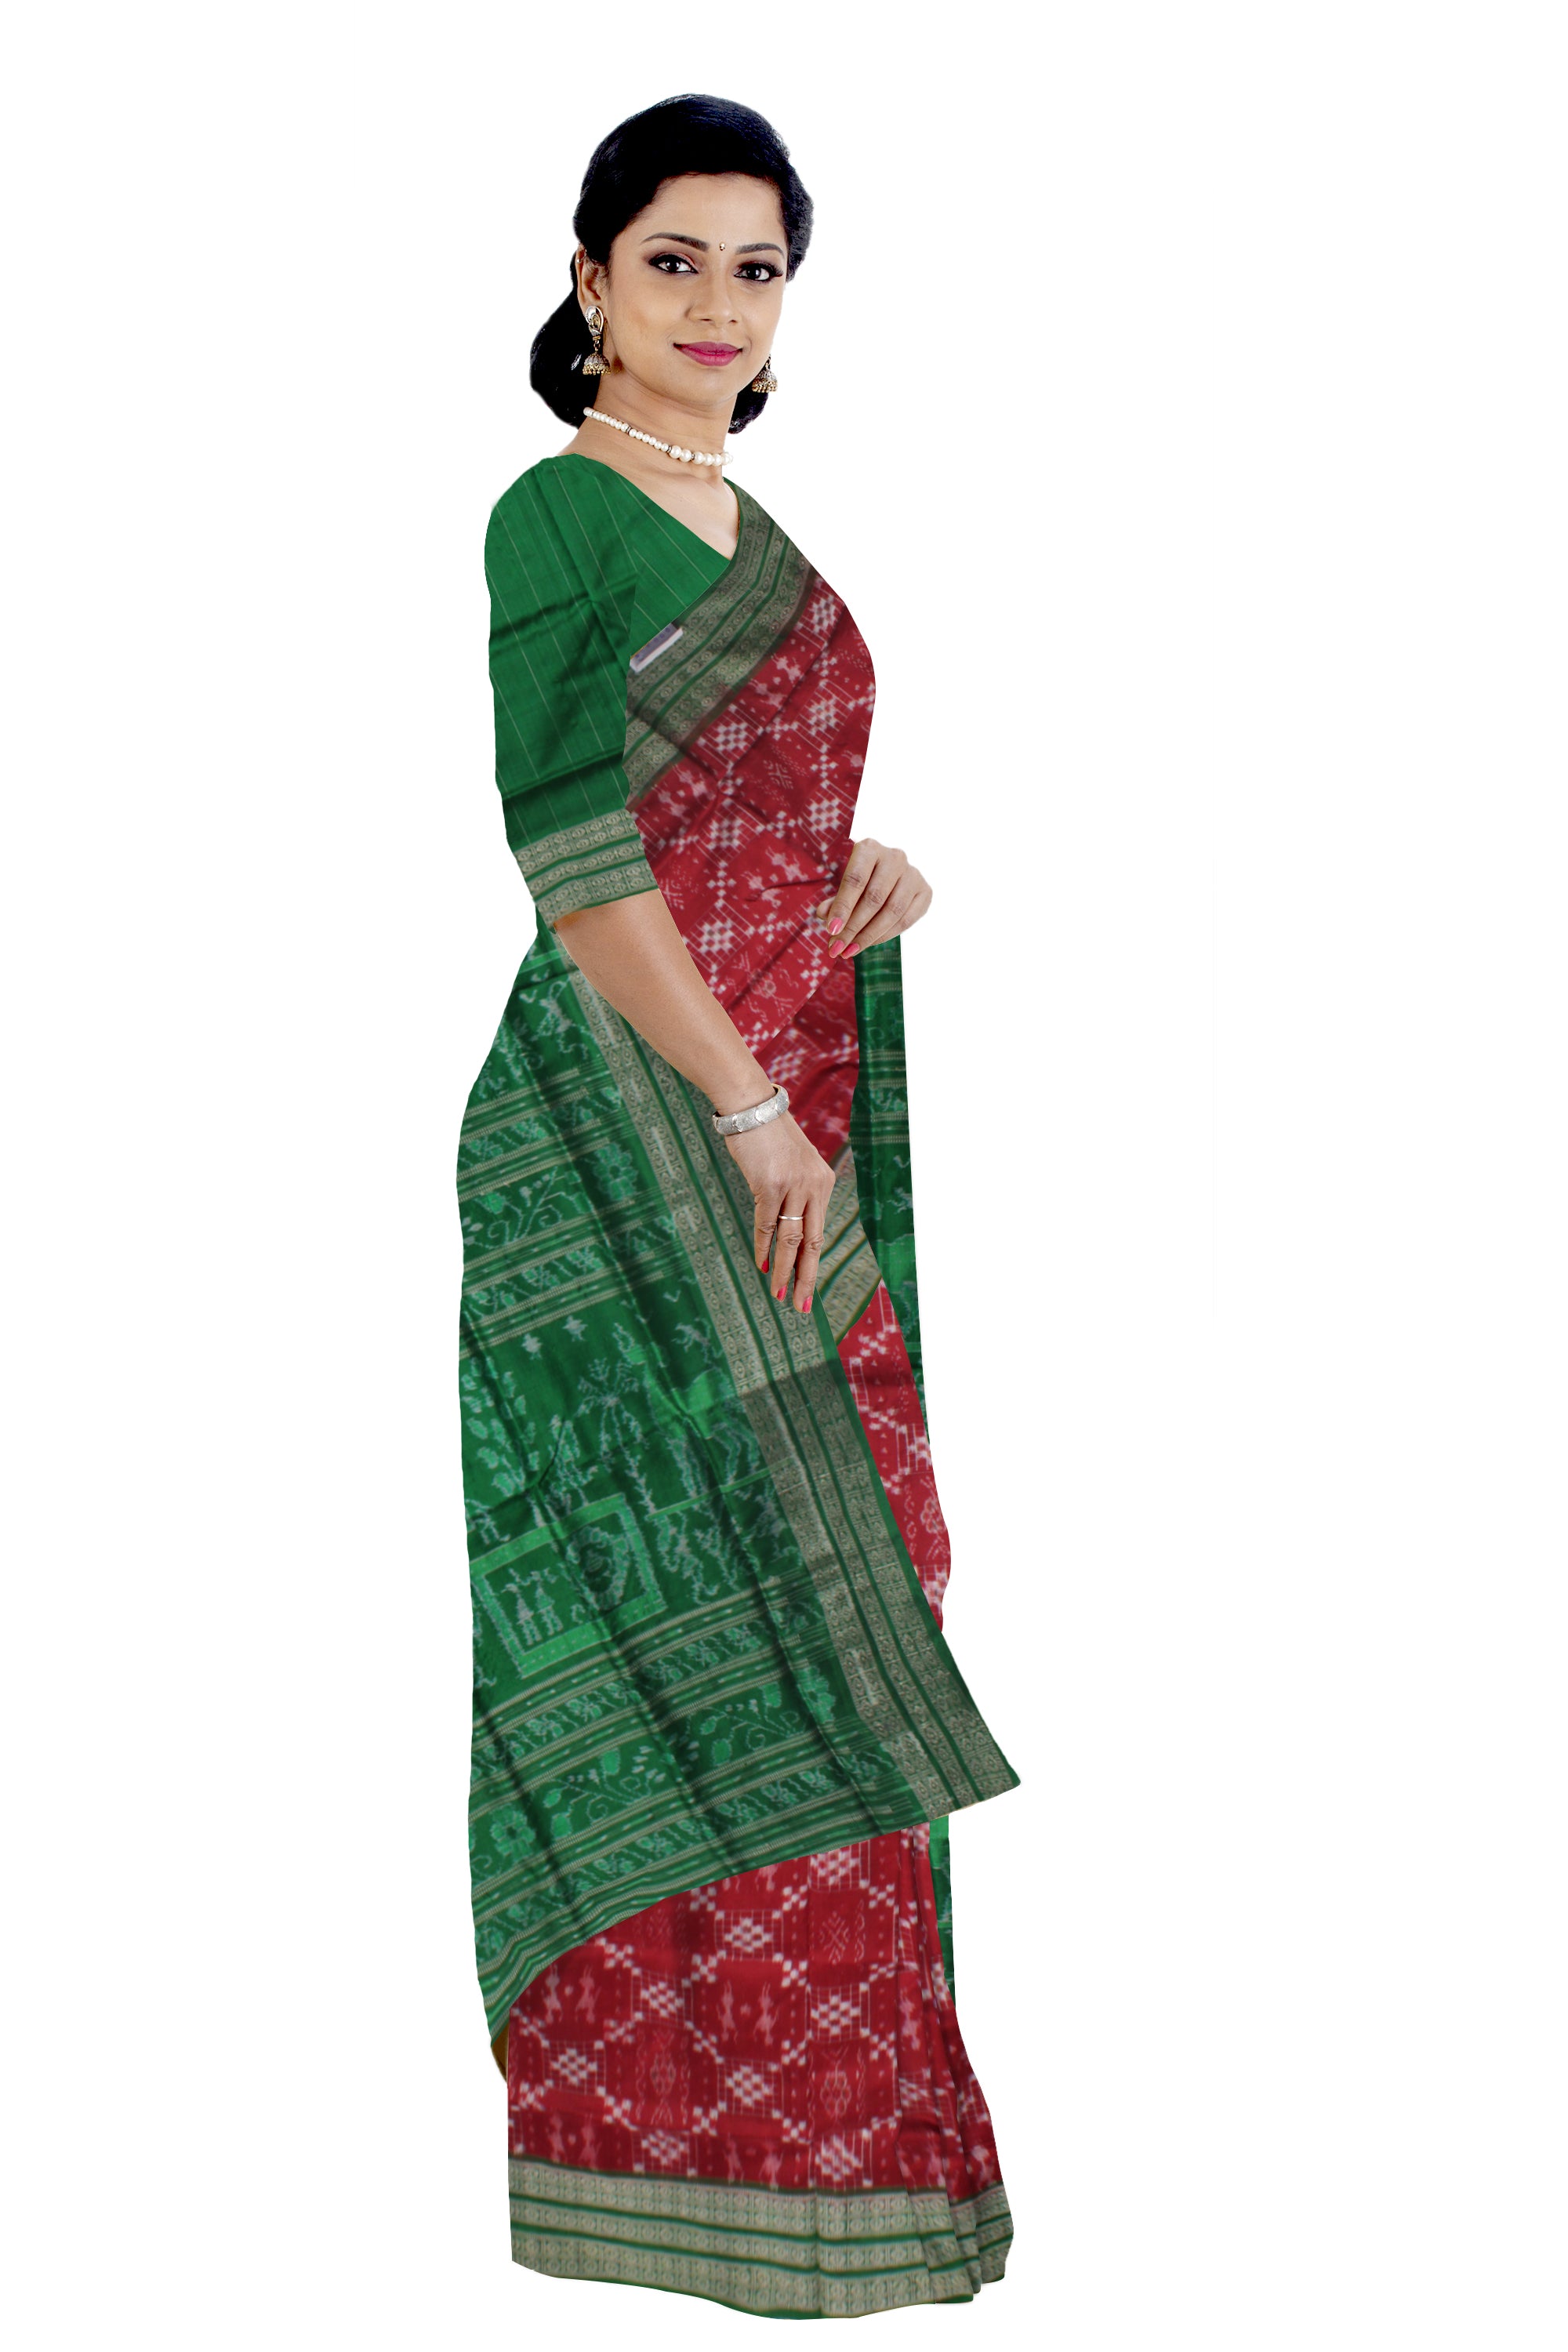 TERRACOTTA WITH PASAPALI PATTERN PURE SILK SAREE IS MAROON AND GREEN COLOR BASE,ATTACHED WITH MATCHING BLOUSE PIECE. - Koshali Arts & Crafts Enterprise